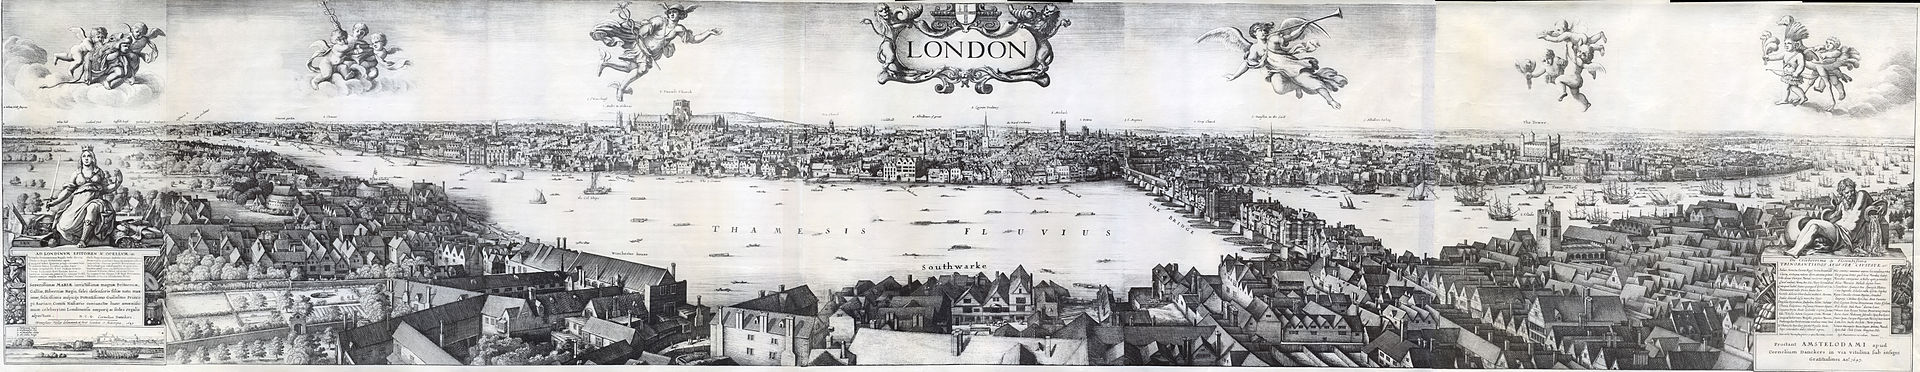 Wenceslaus Hollar’s Long View of London from Bankside. Image courtesy of Wikimedia Commons.